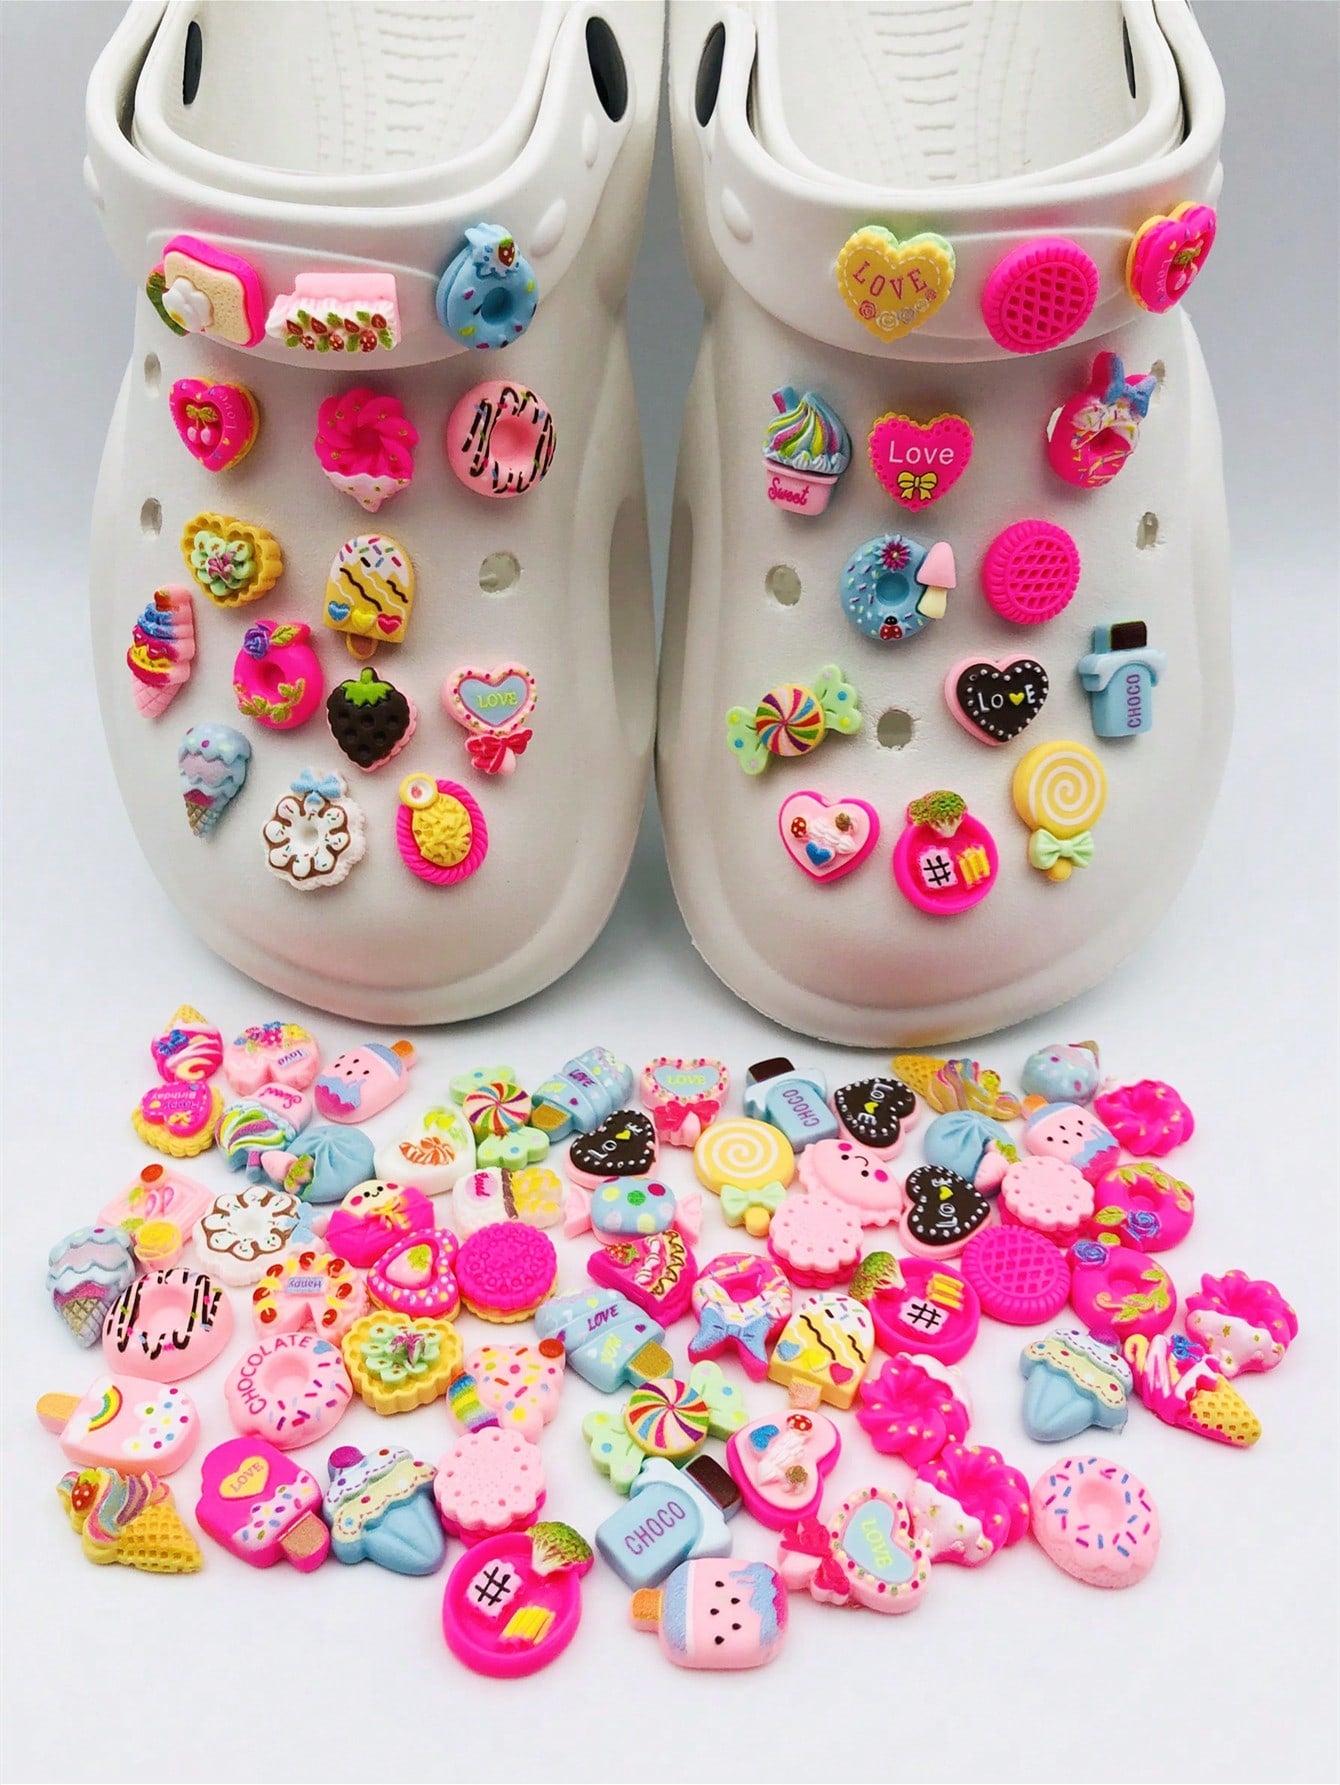 30pcs/Set Cartoon Resin Colorful Flower Fruit Star-Shaped Shoe Charms Accessories(Random Pattern With Universal Buckle)